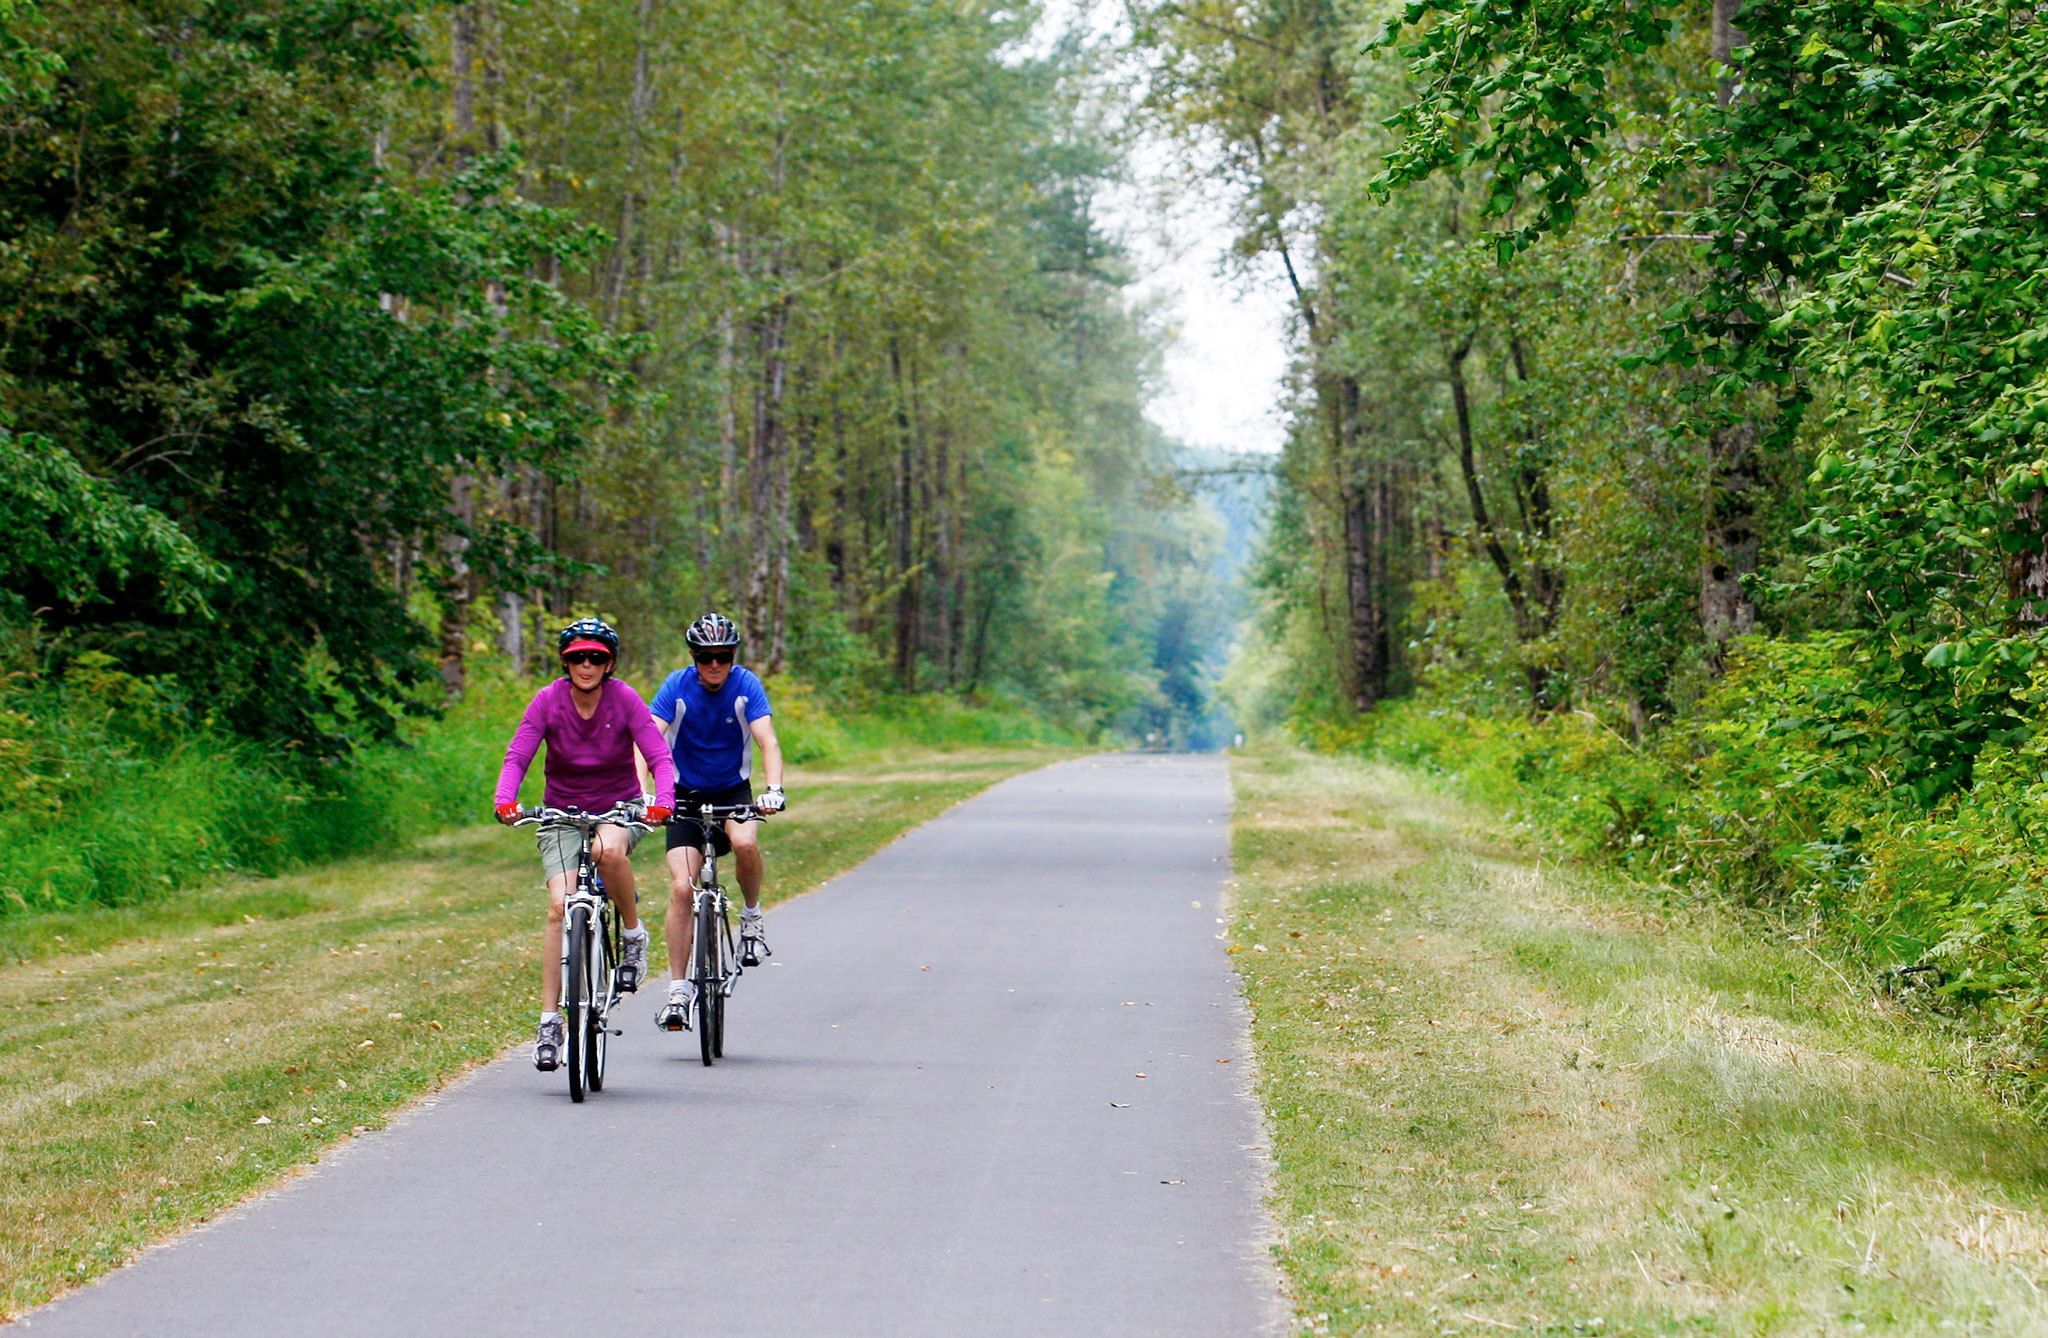 Jean Olson and her husband, Donald, of Arlington, ride south on the Centennial Trail outside of Bryant before turning around and heading back to the Nakashima Heritage Barn. “We like to come out once every week or so,” Donald said. (Herald file, July 31, 2013)